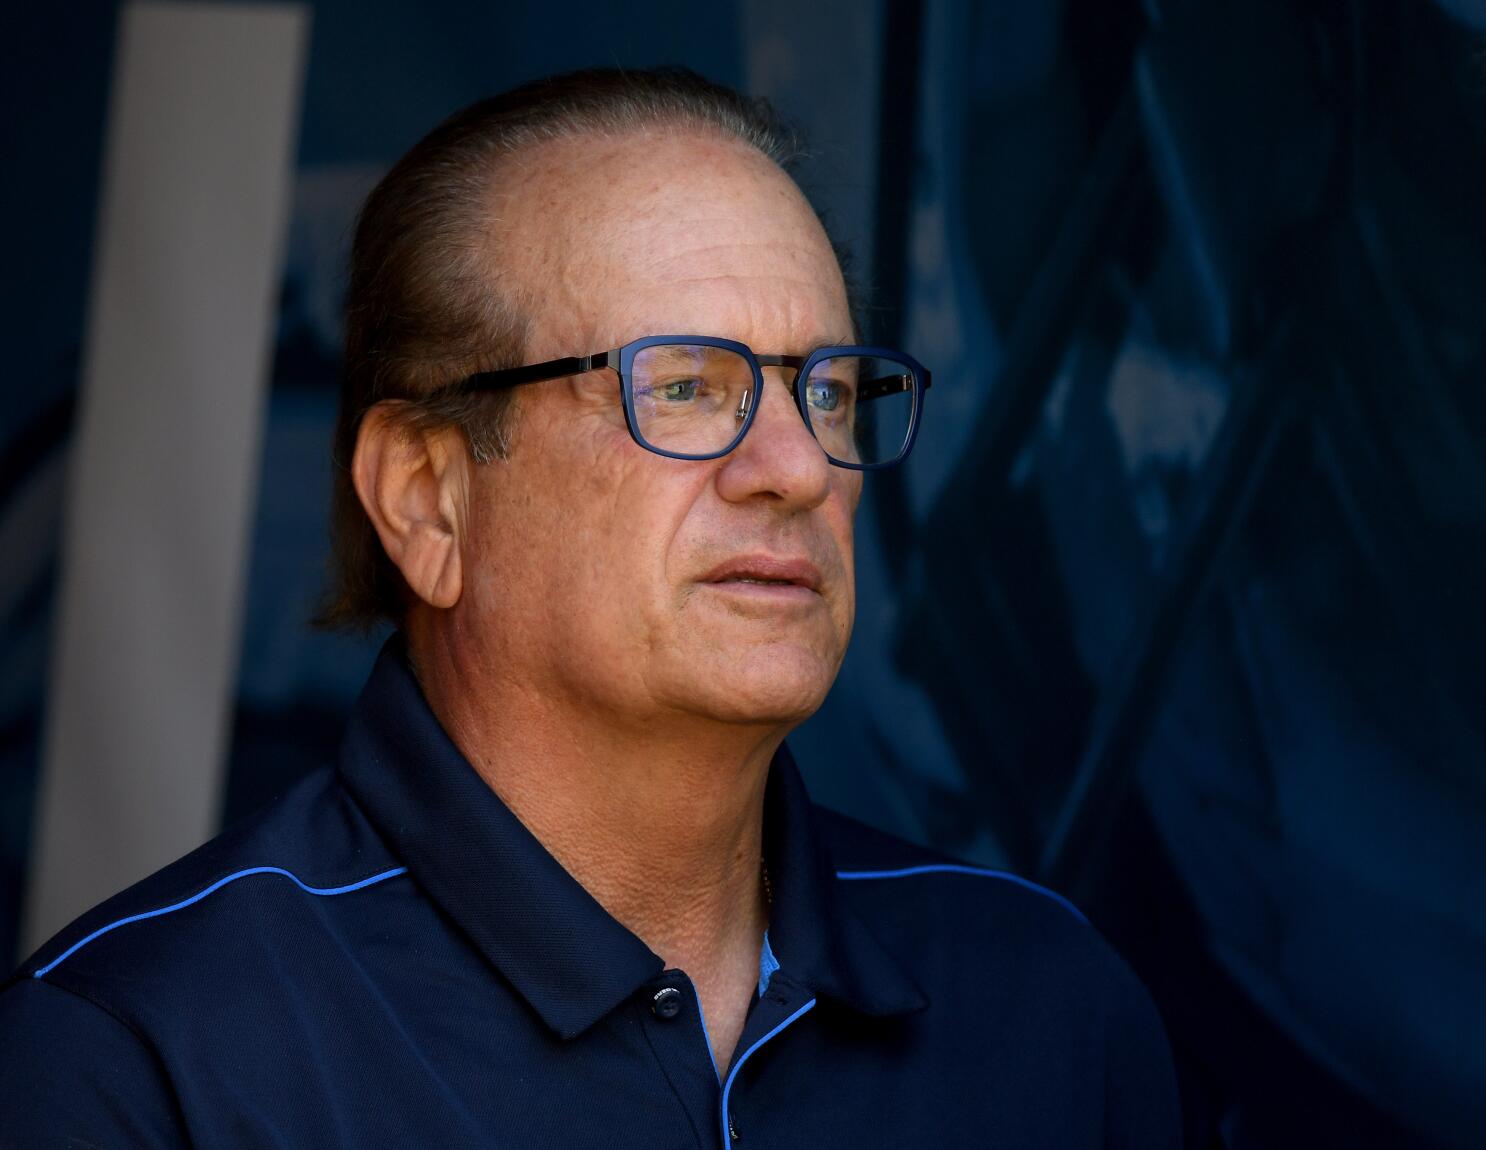 Los Angeles Chargers Owner Spanos Berberian Looking to Sell 24